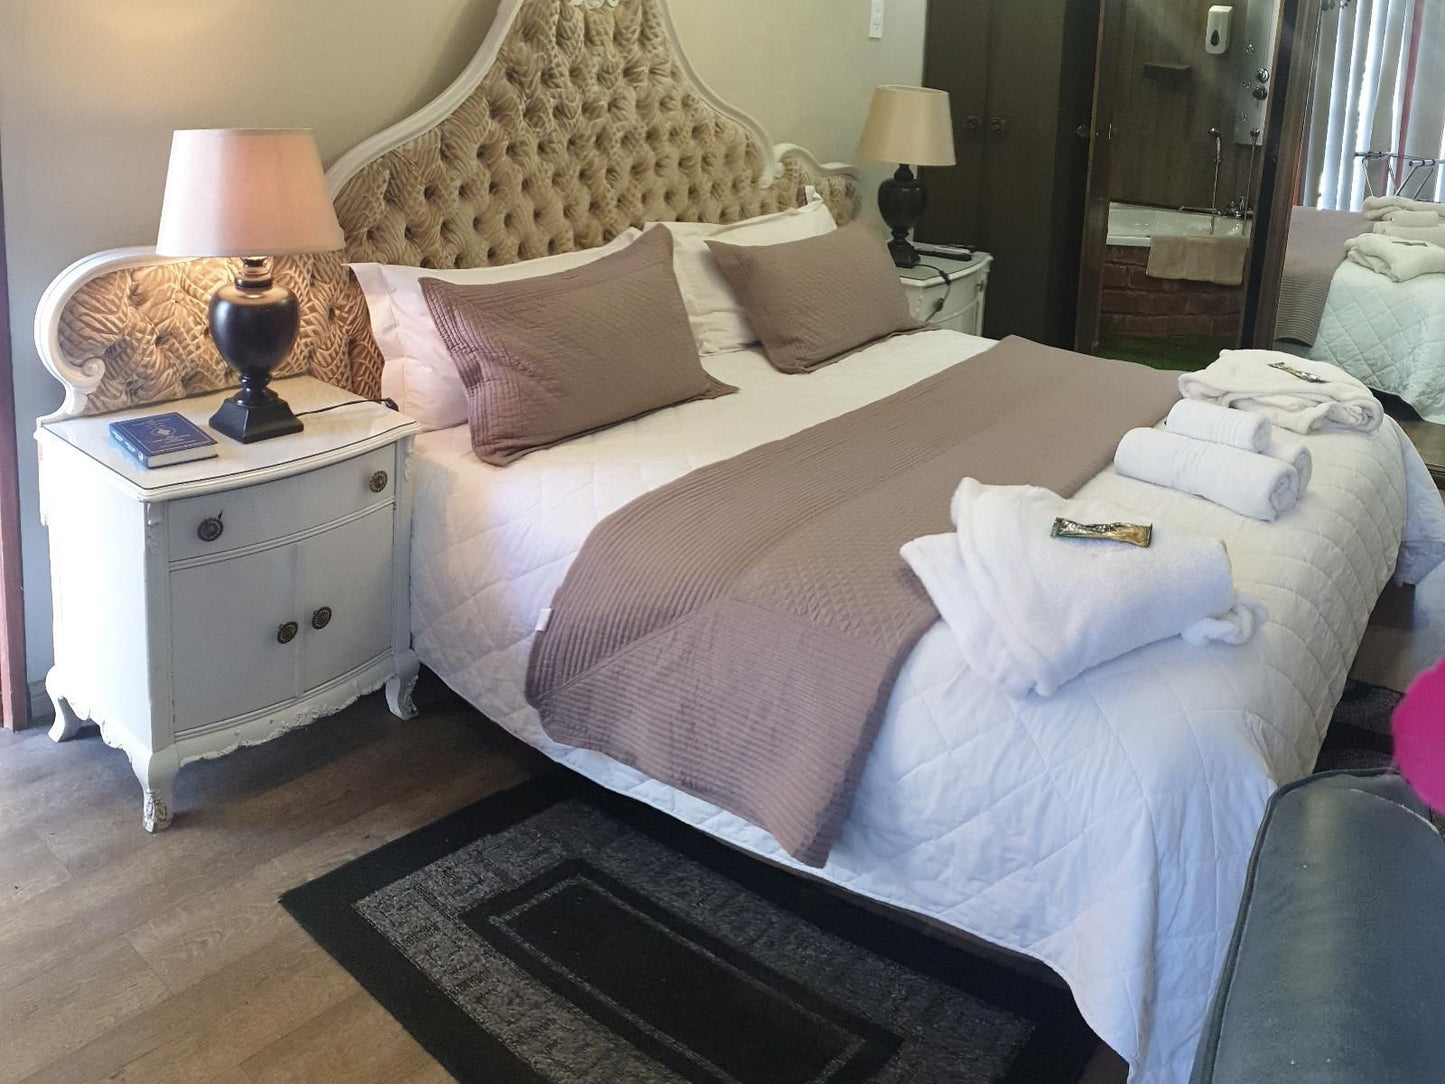 Belurana Collection Victoria Manor Rand Upington Northern Cape South Africa Bedroom